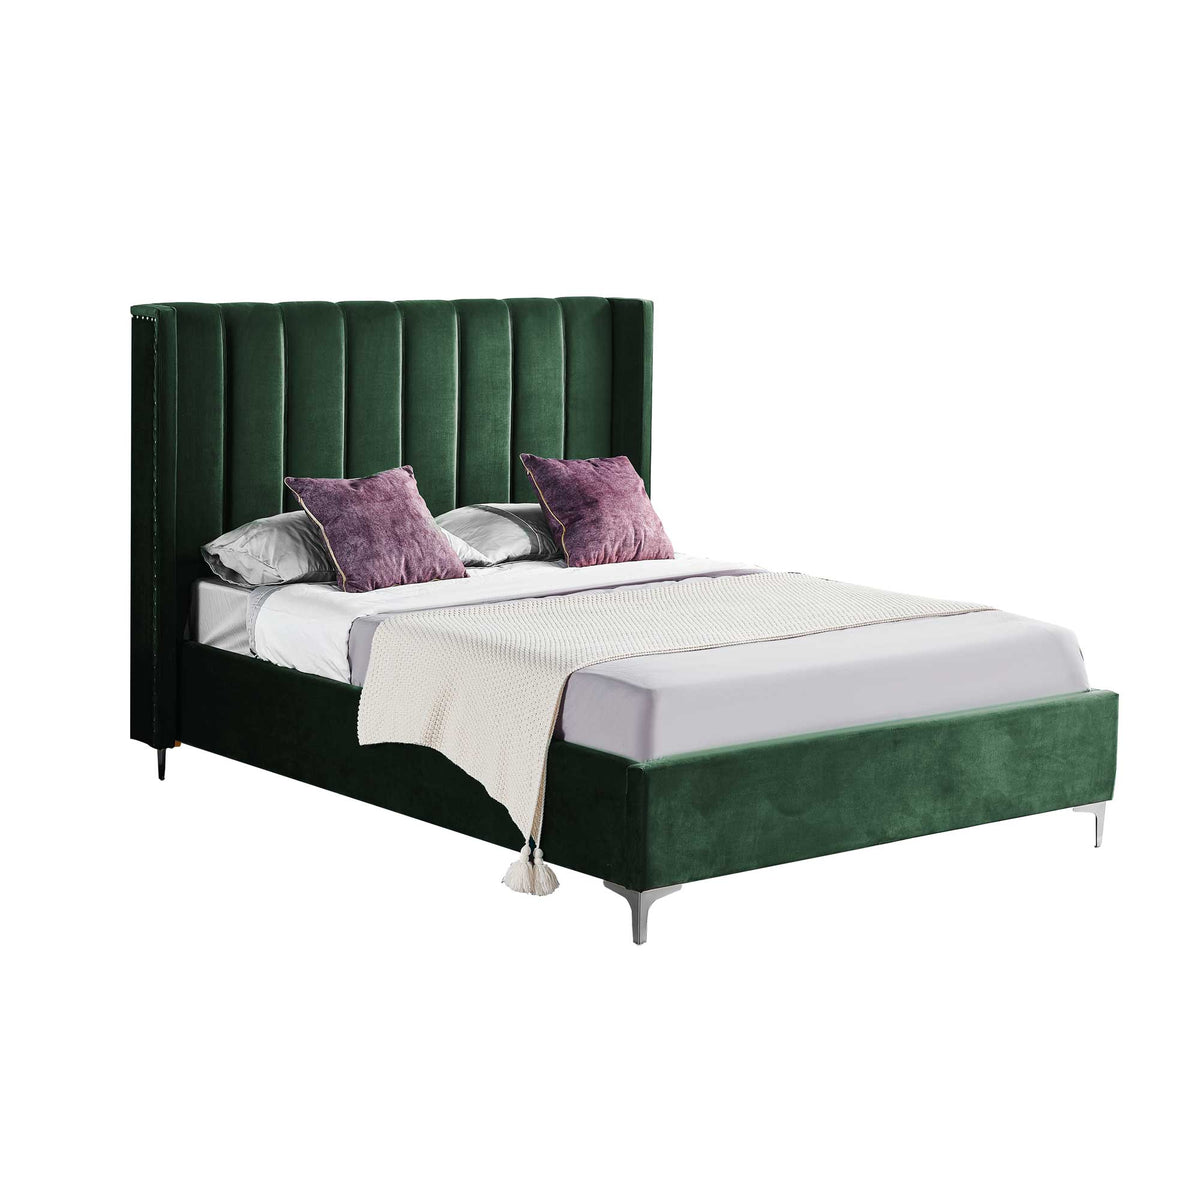 Colorado Champagne Bed Frame